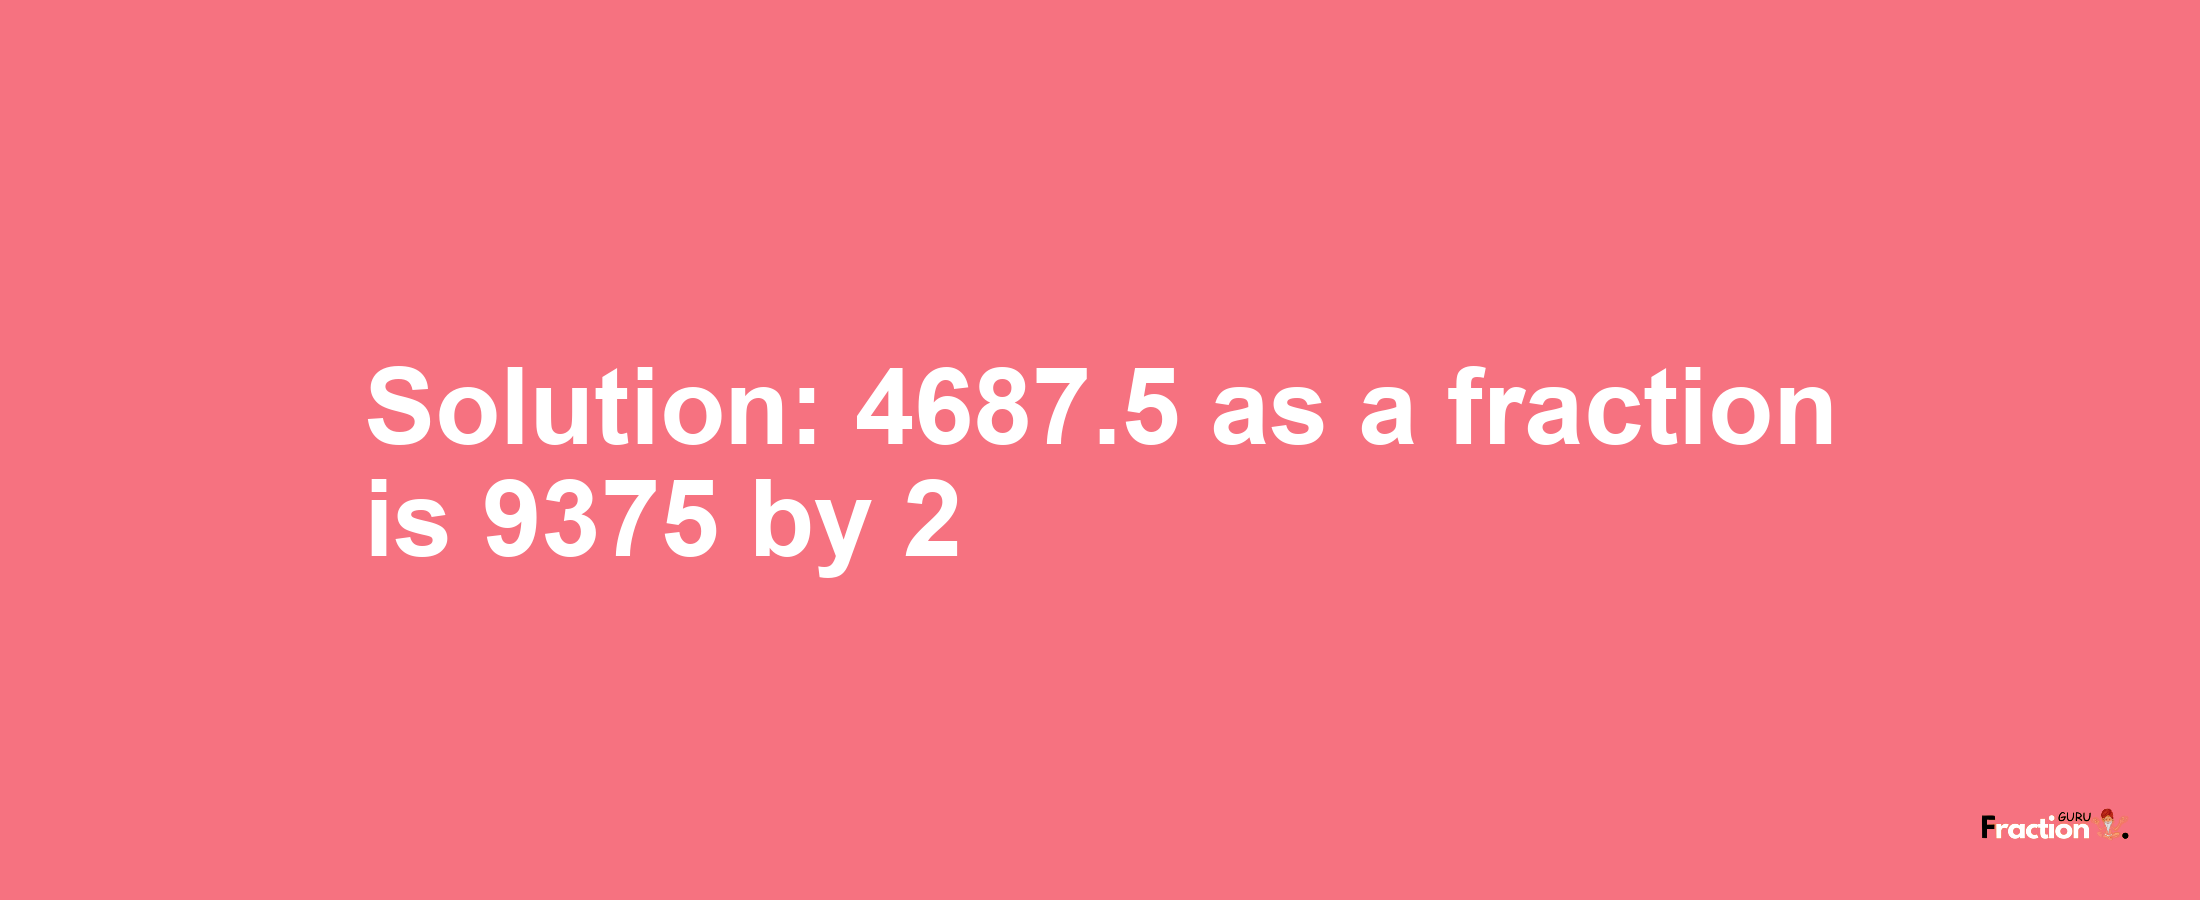 Solution:4687.5 as a fraction is 9375/2